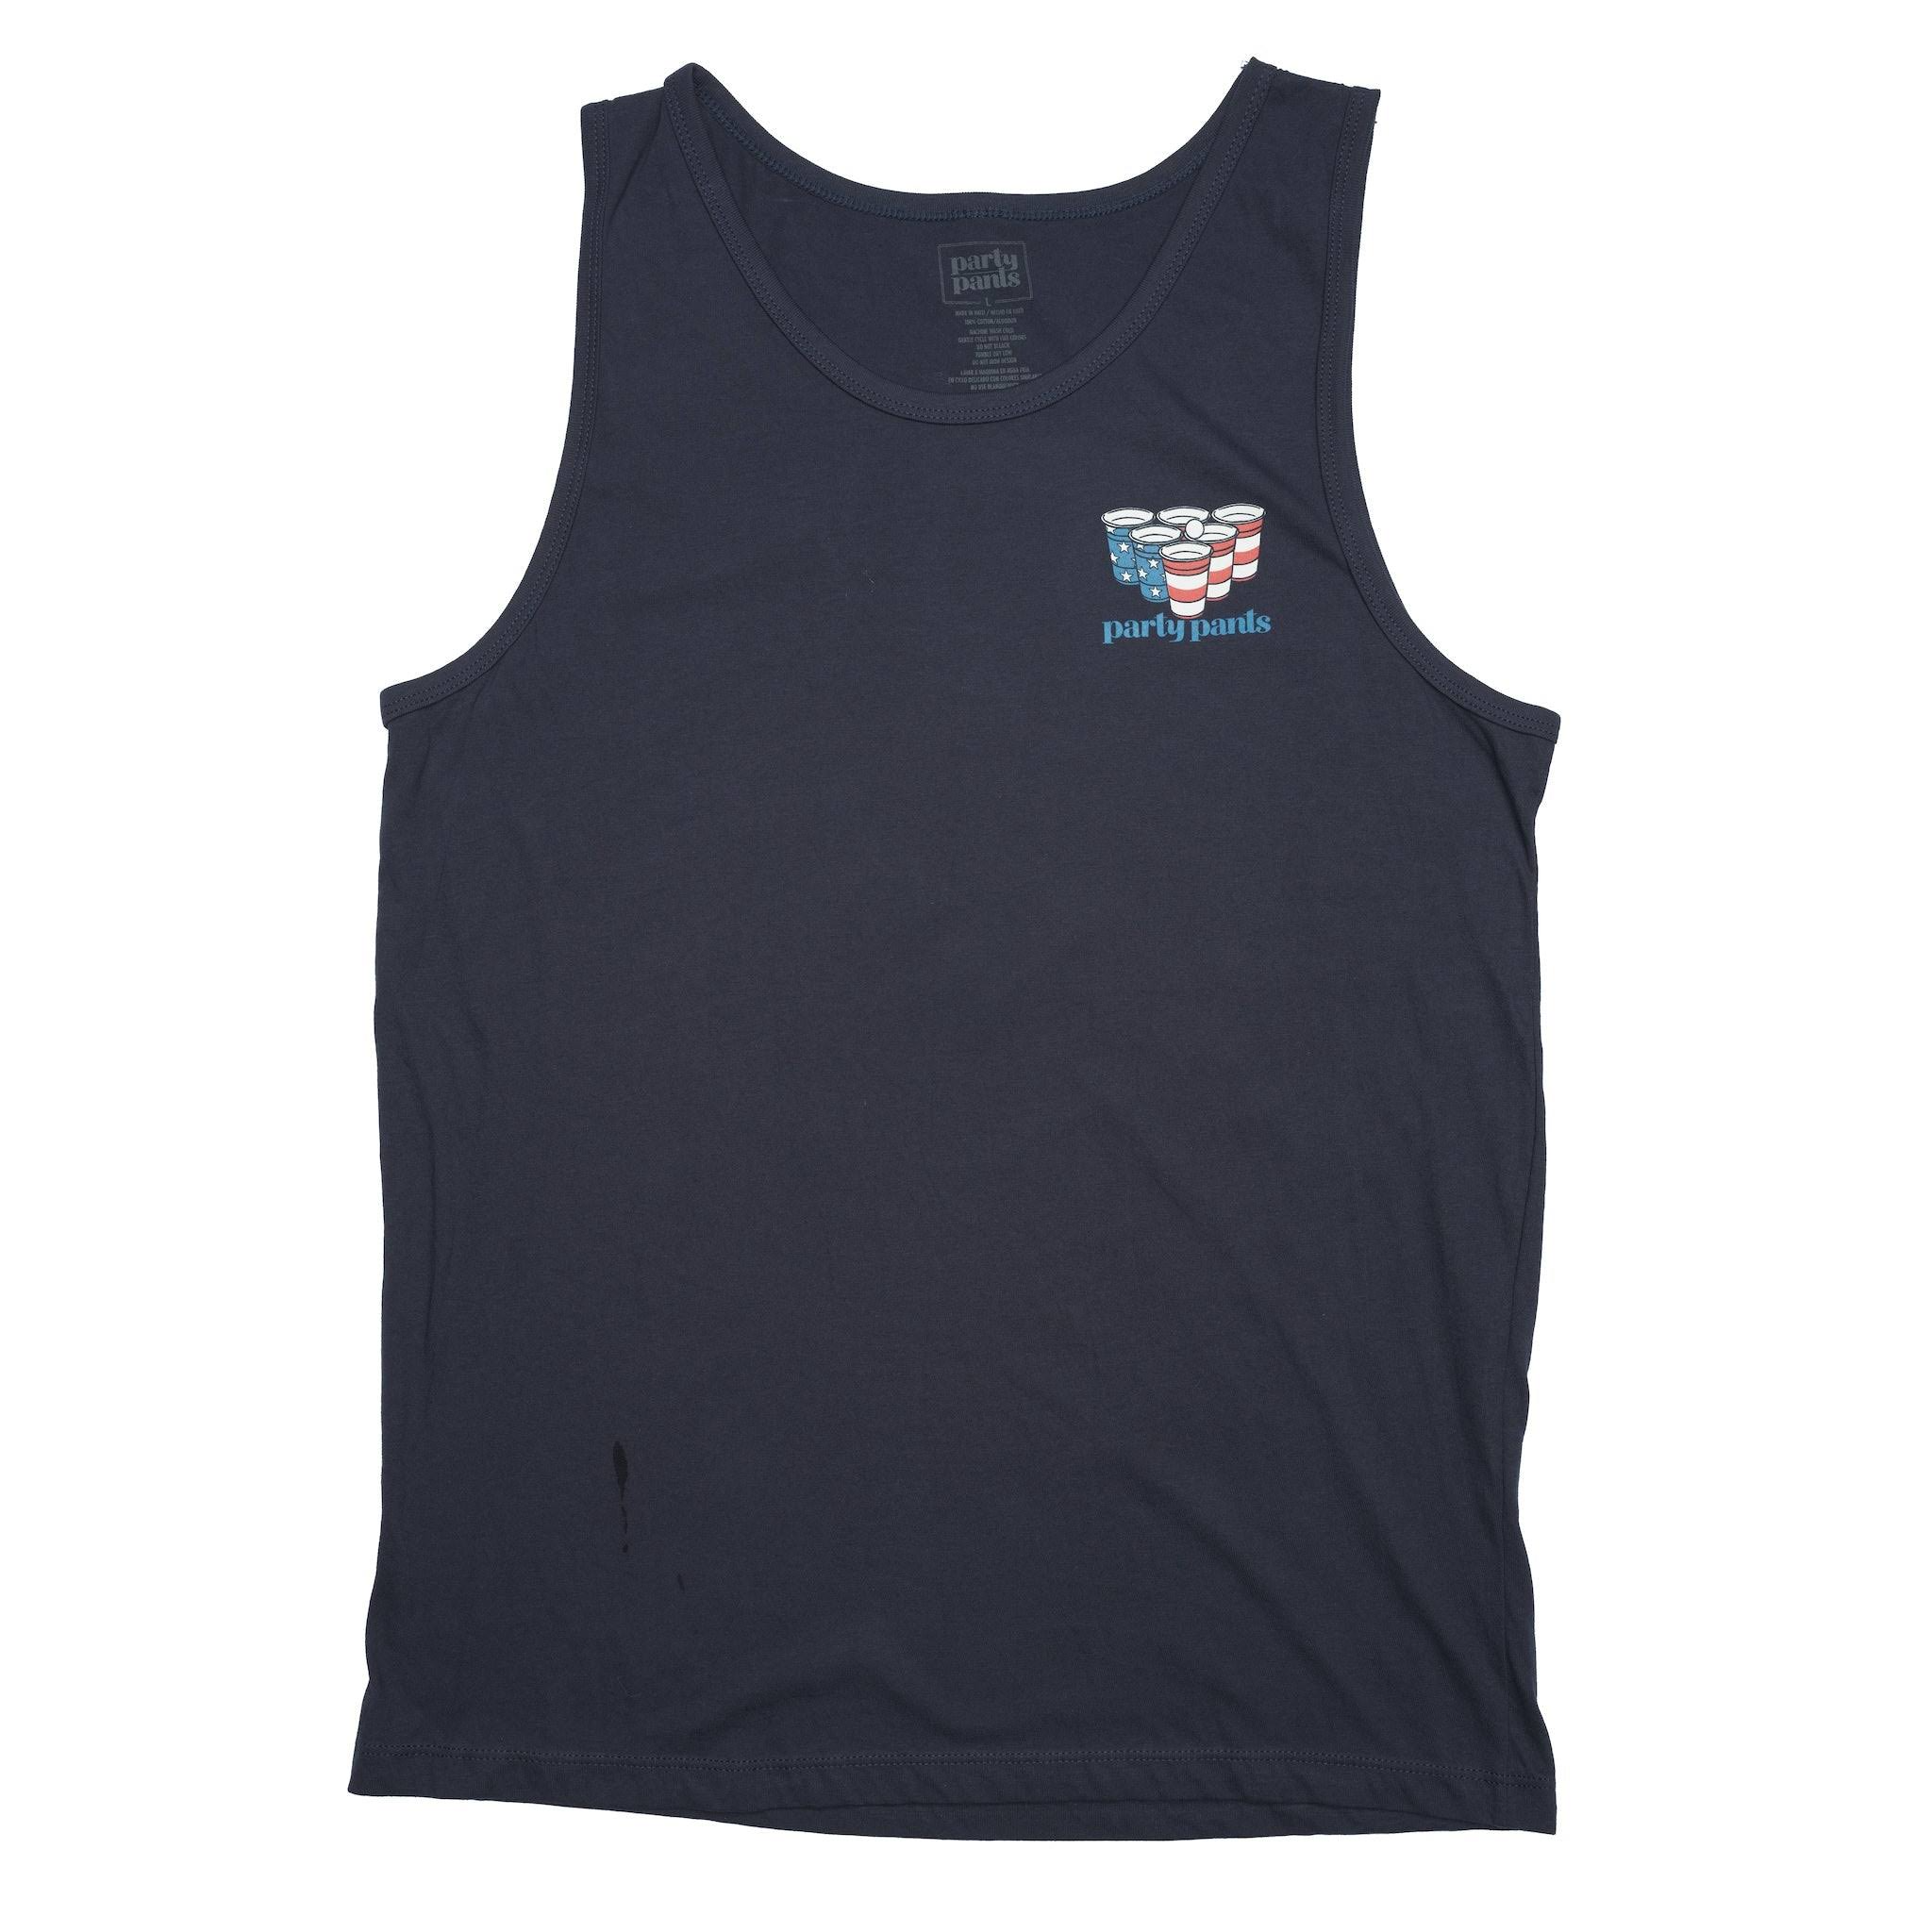 PARTY PANTS- BEER PONG TANK